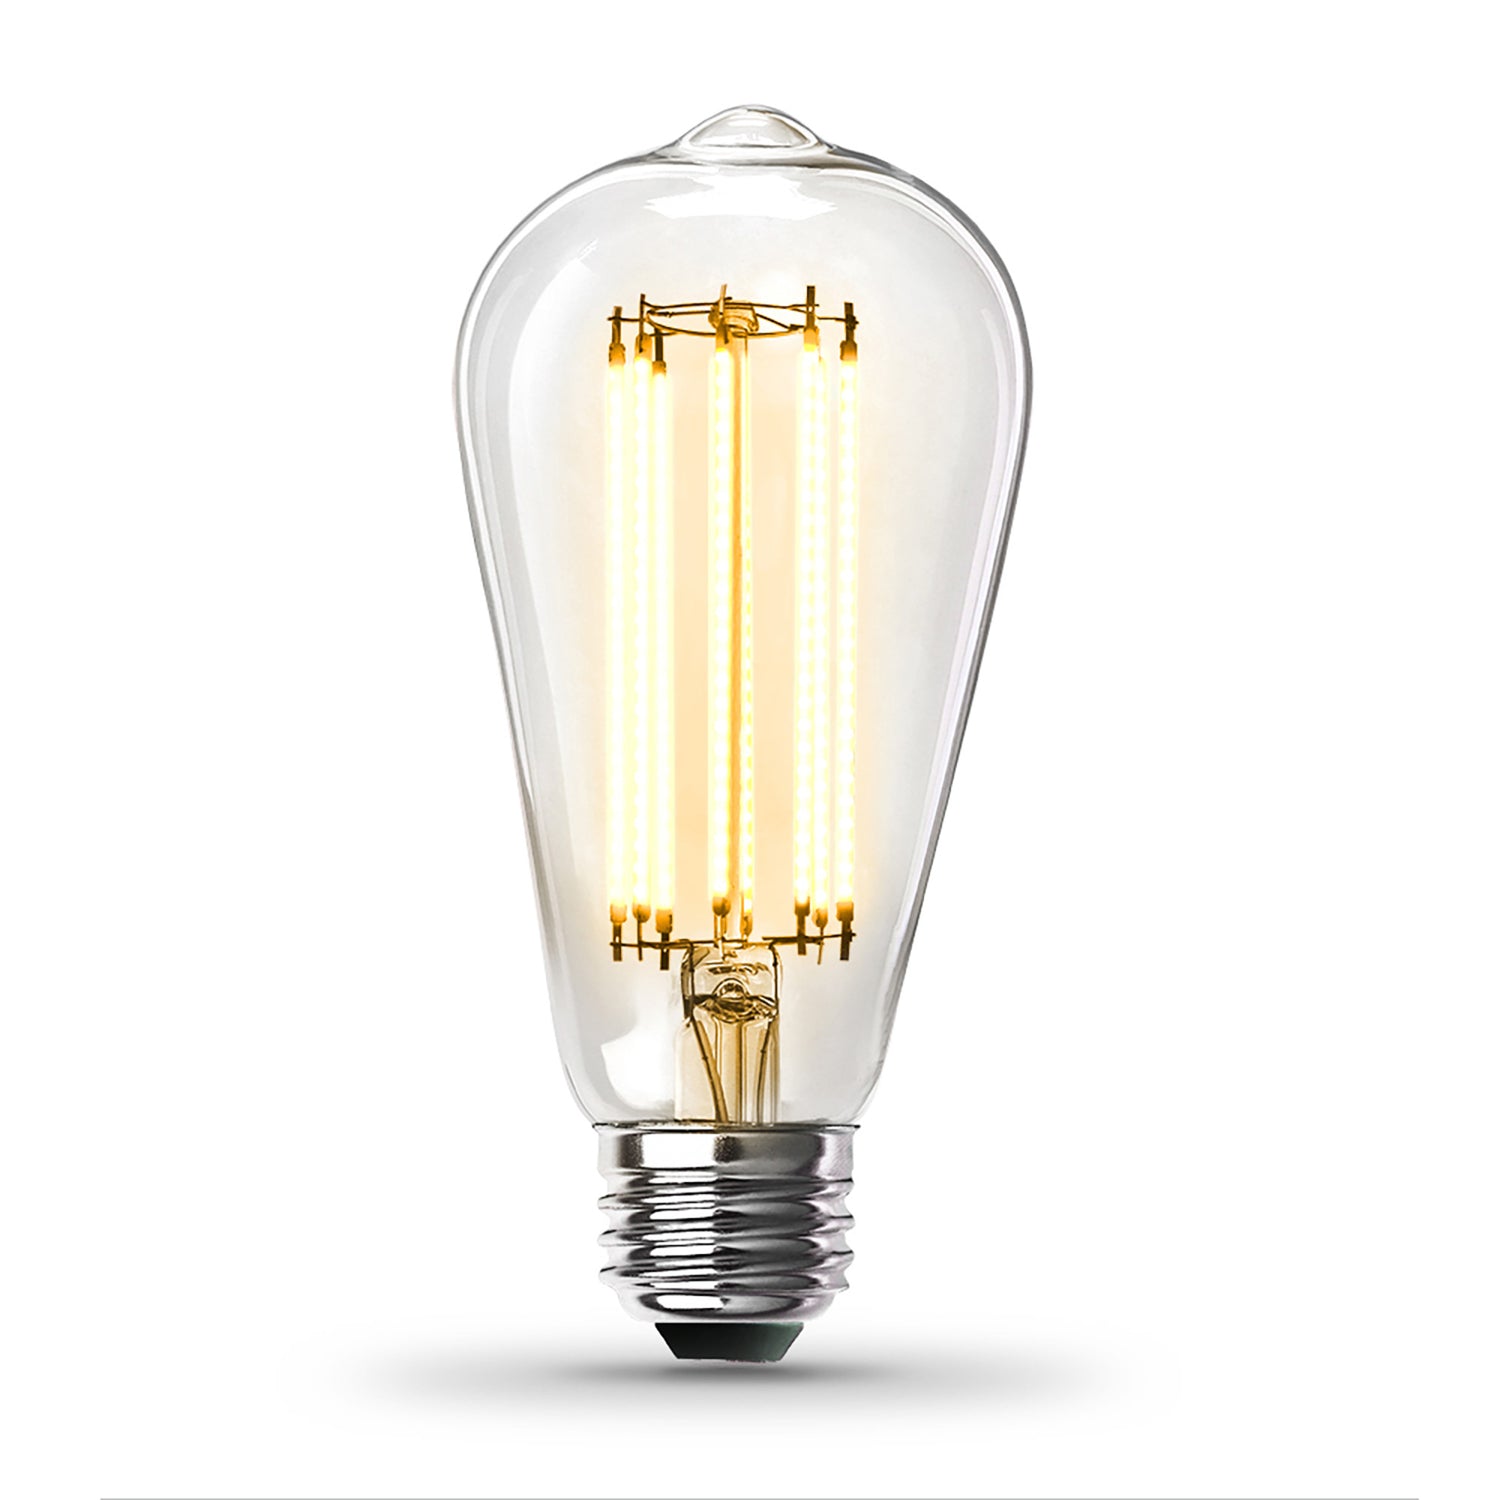 15W (100W Replacement) ST19 E26 Dimmable Straight Filament Clear Glass Vintage Edison LED Light Bulb, Warm Light